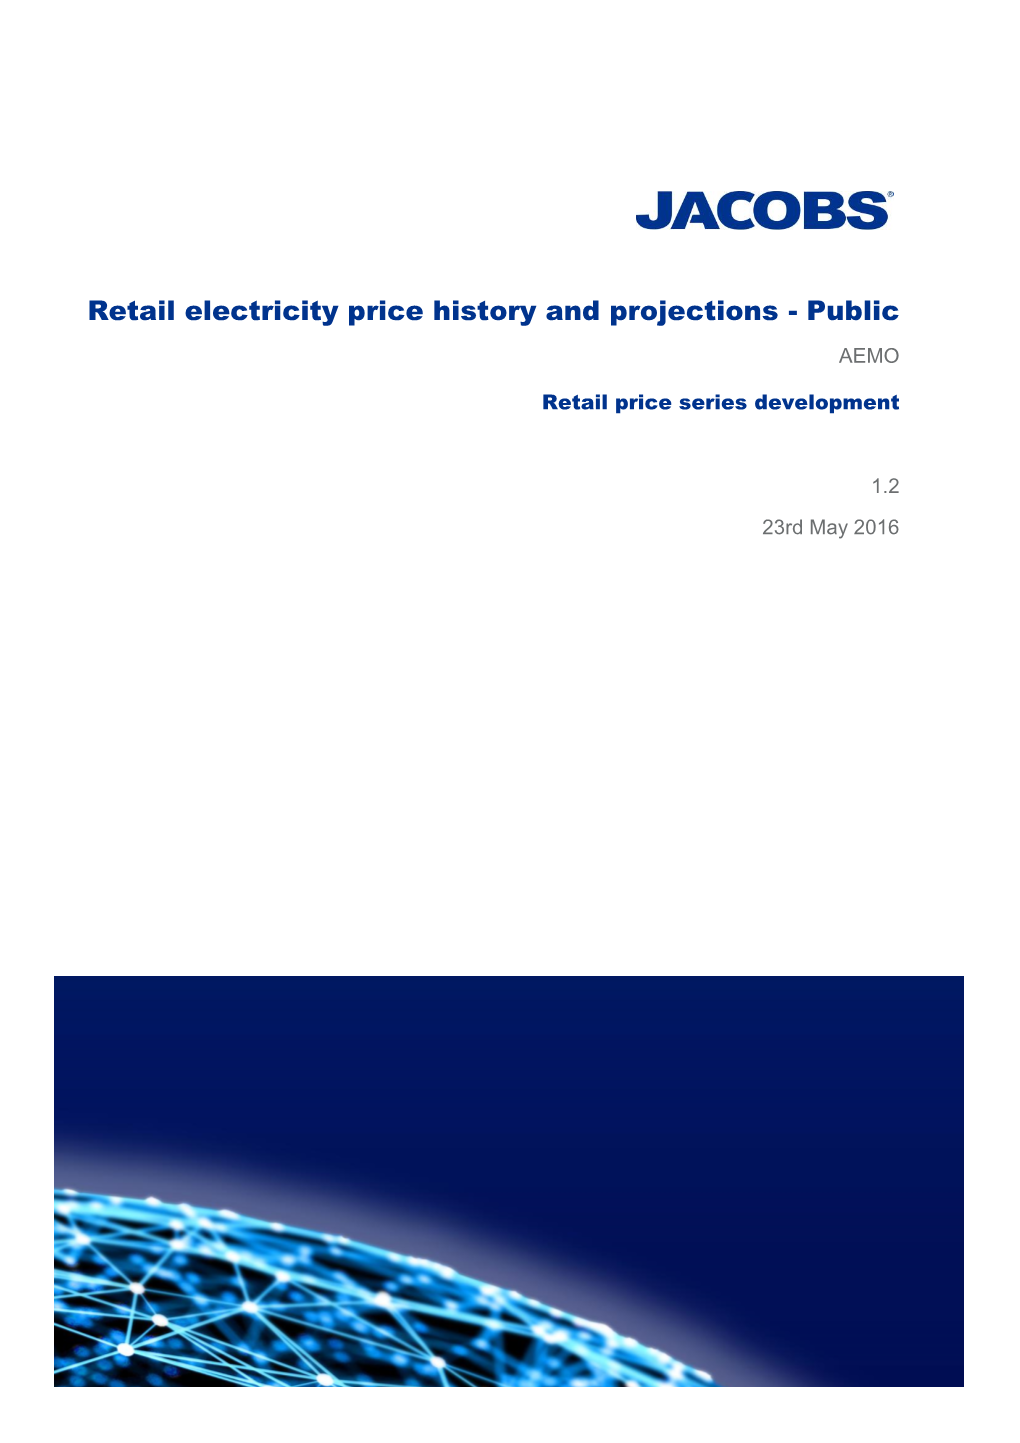 Retail Electricity Price History and Projections - Public AEMO